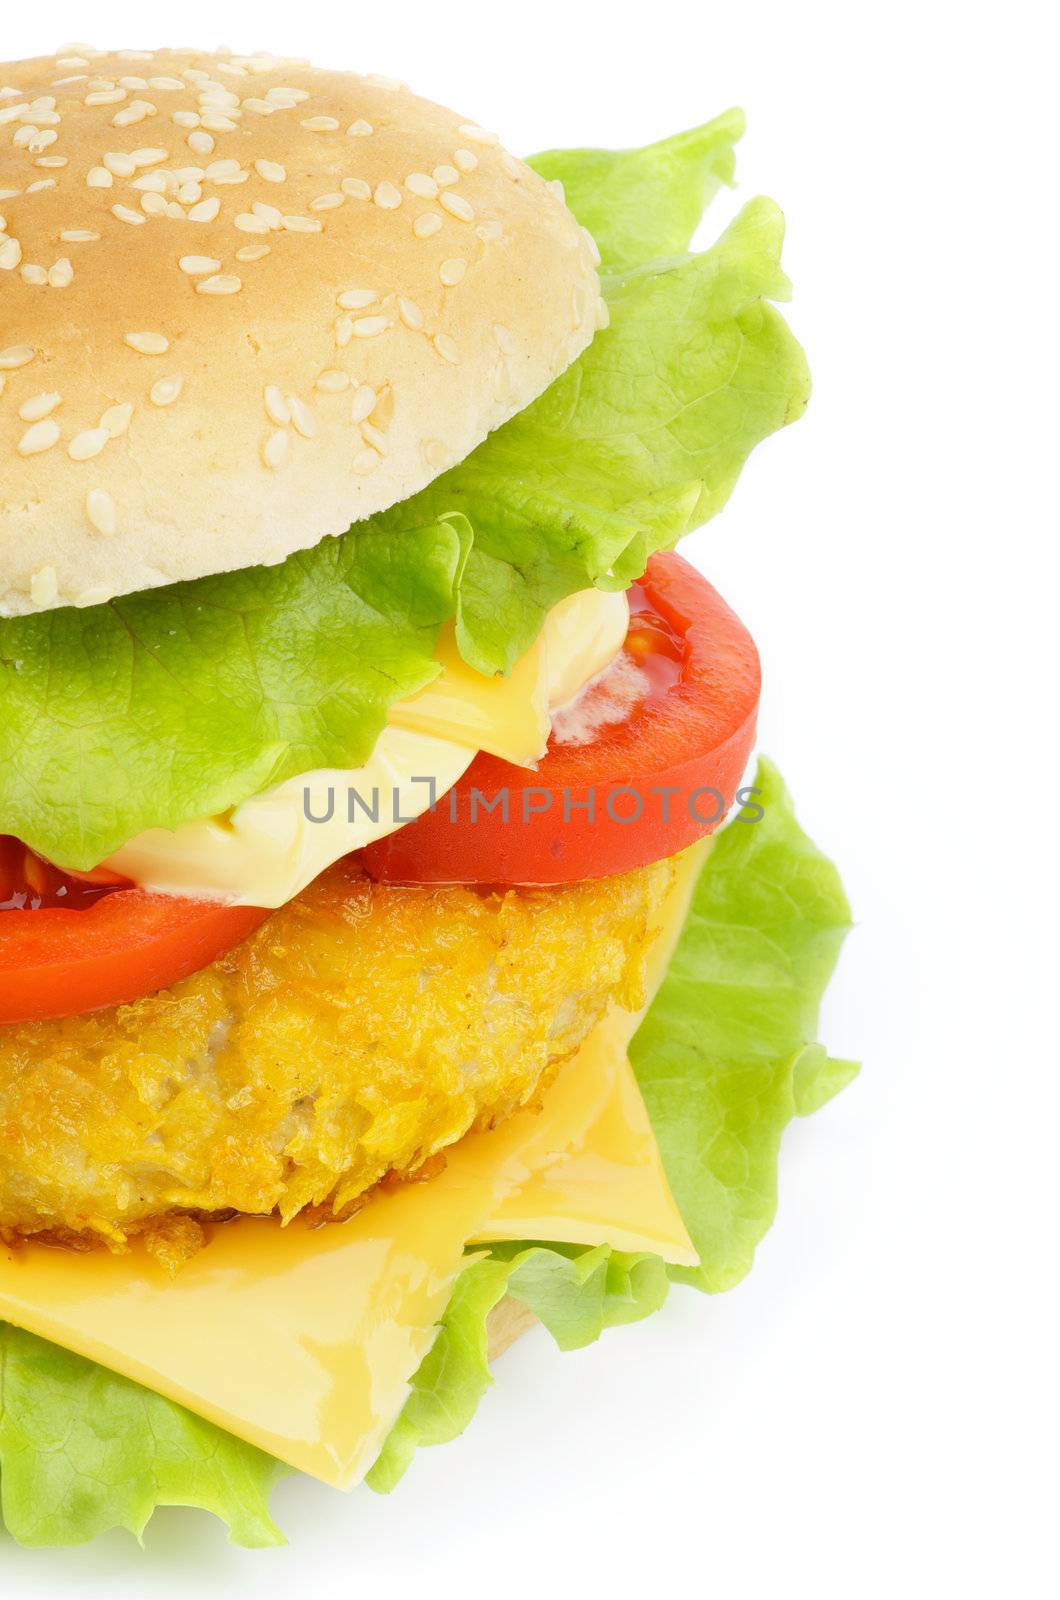 Classic Delicious Sandwich with Breaded Chicken, Lettuce, Tomatoes and Cheese on Sesame Bun cross section on white background